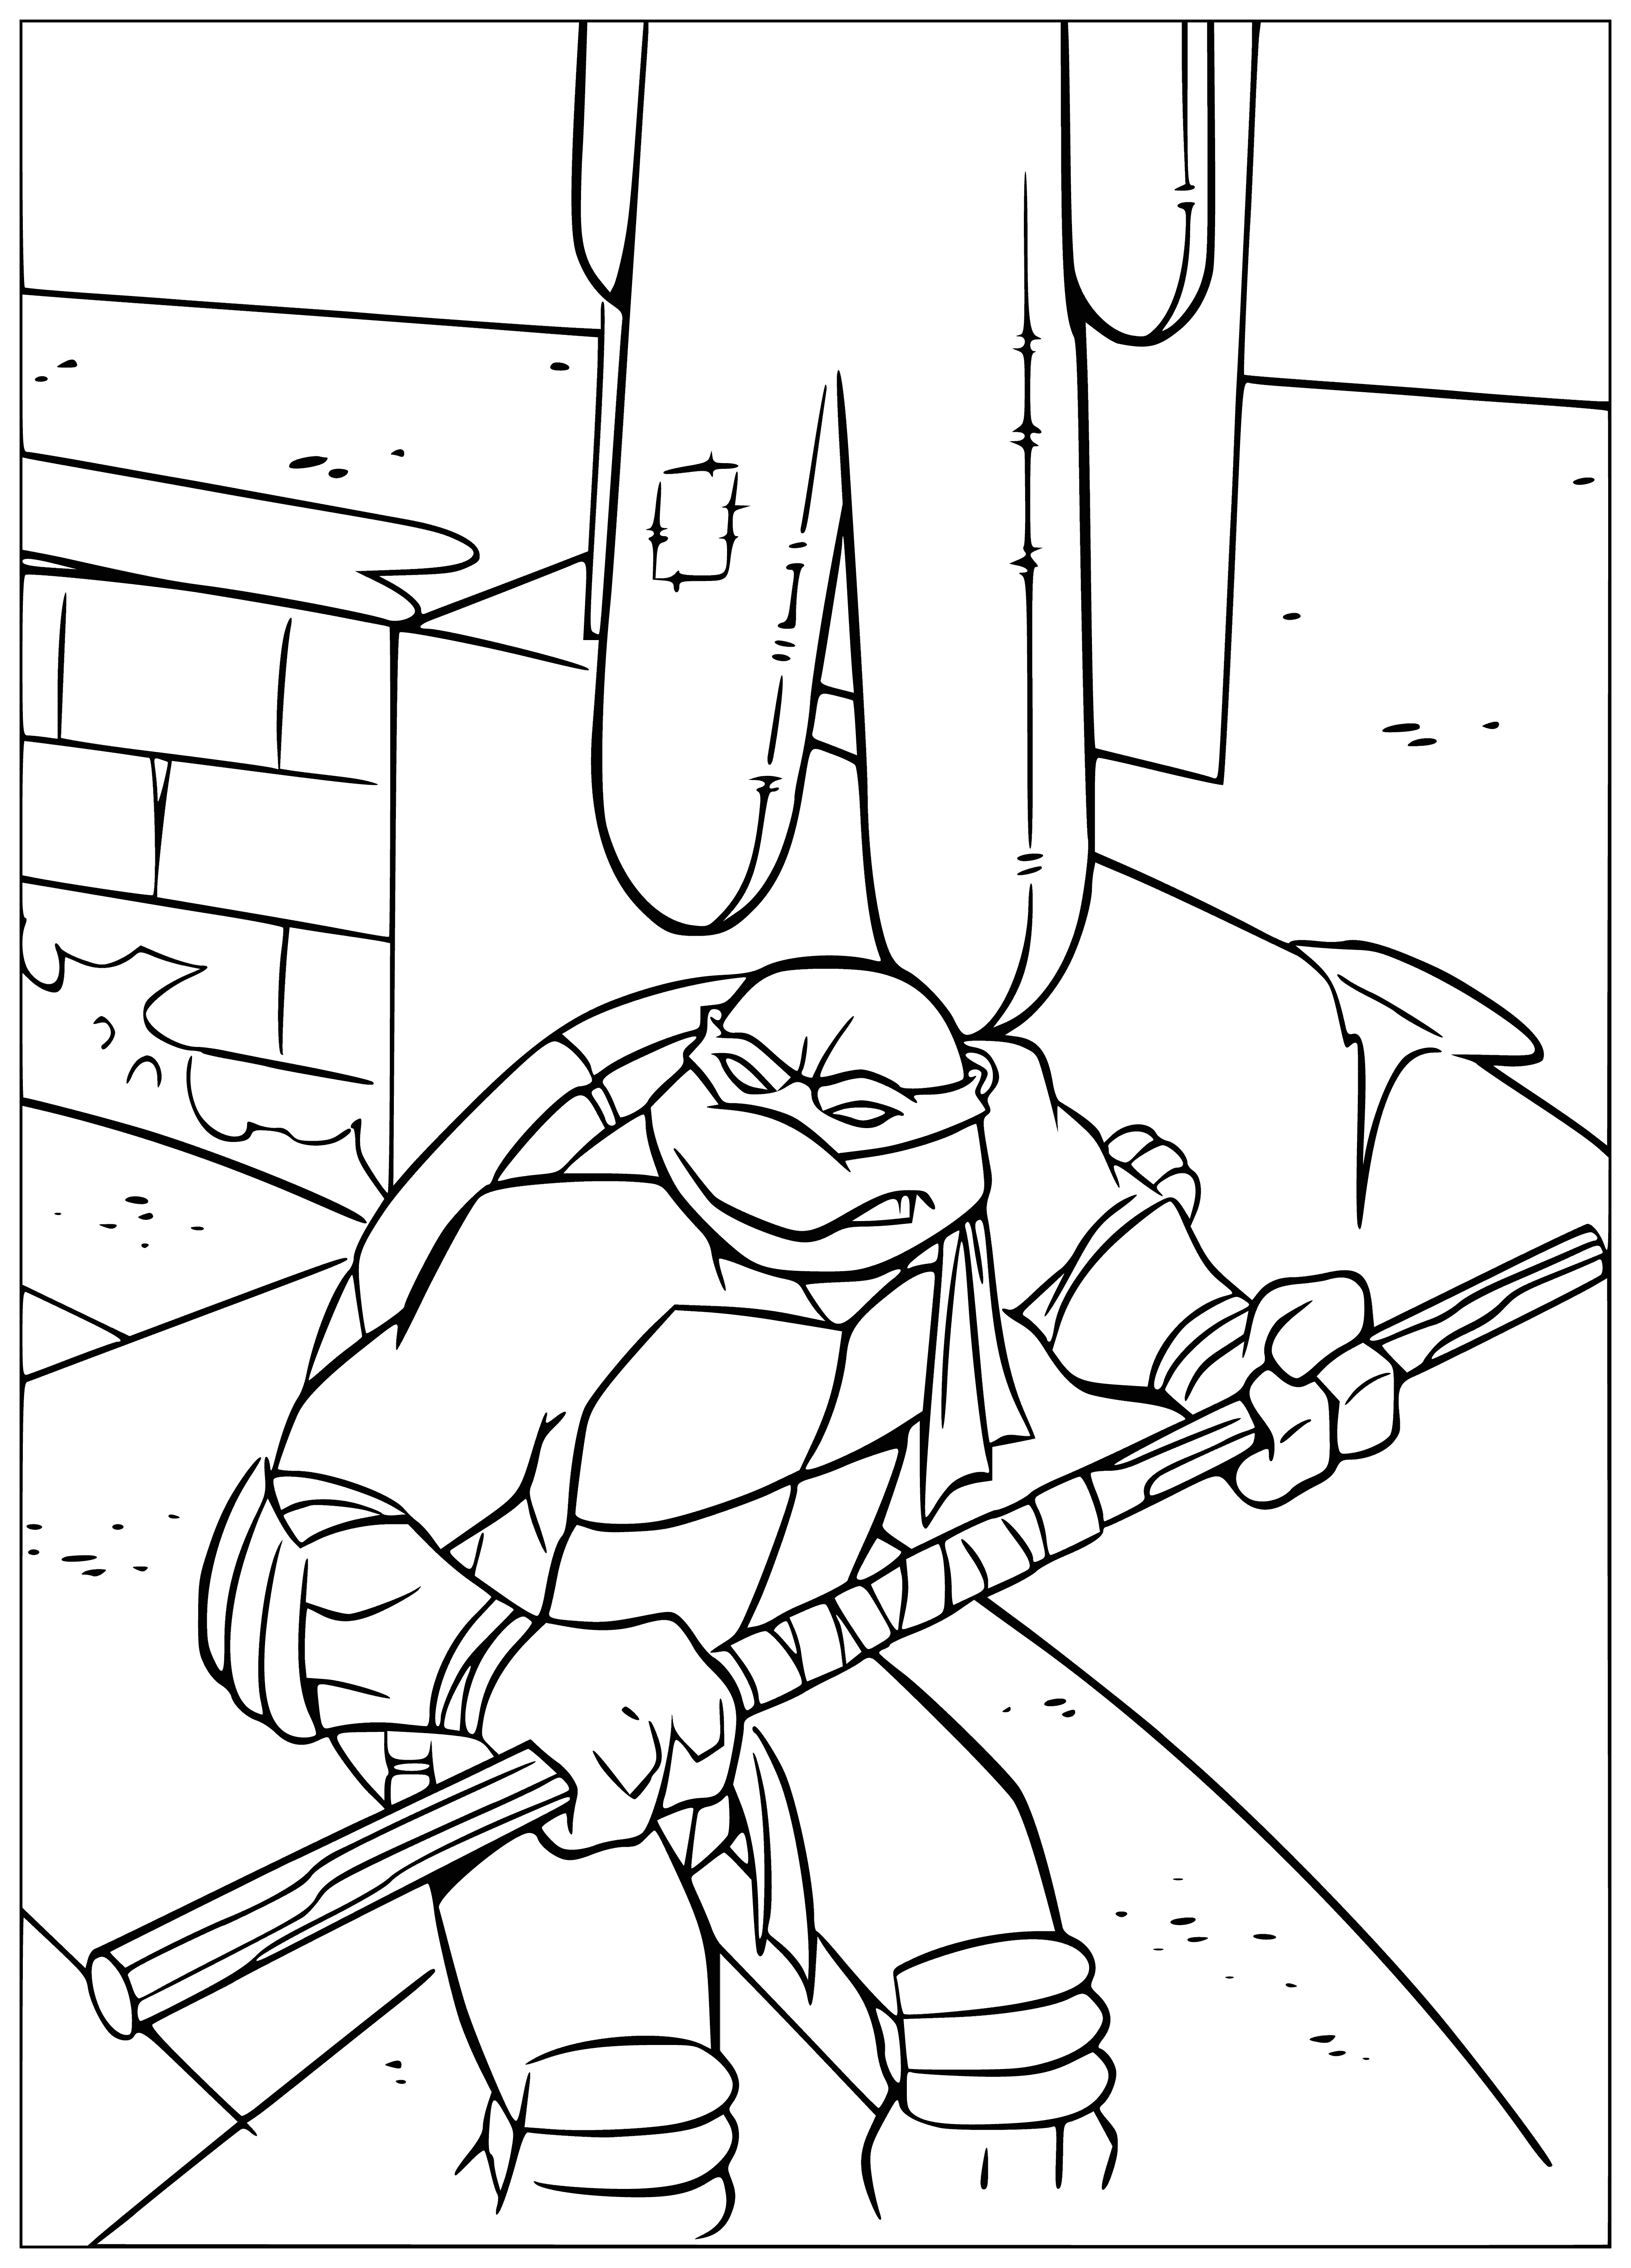 coloring page: A large turtle in a brown shell, green skin, and purple mask is carrying a stick. #coloringpage